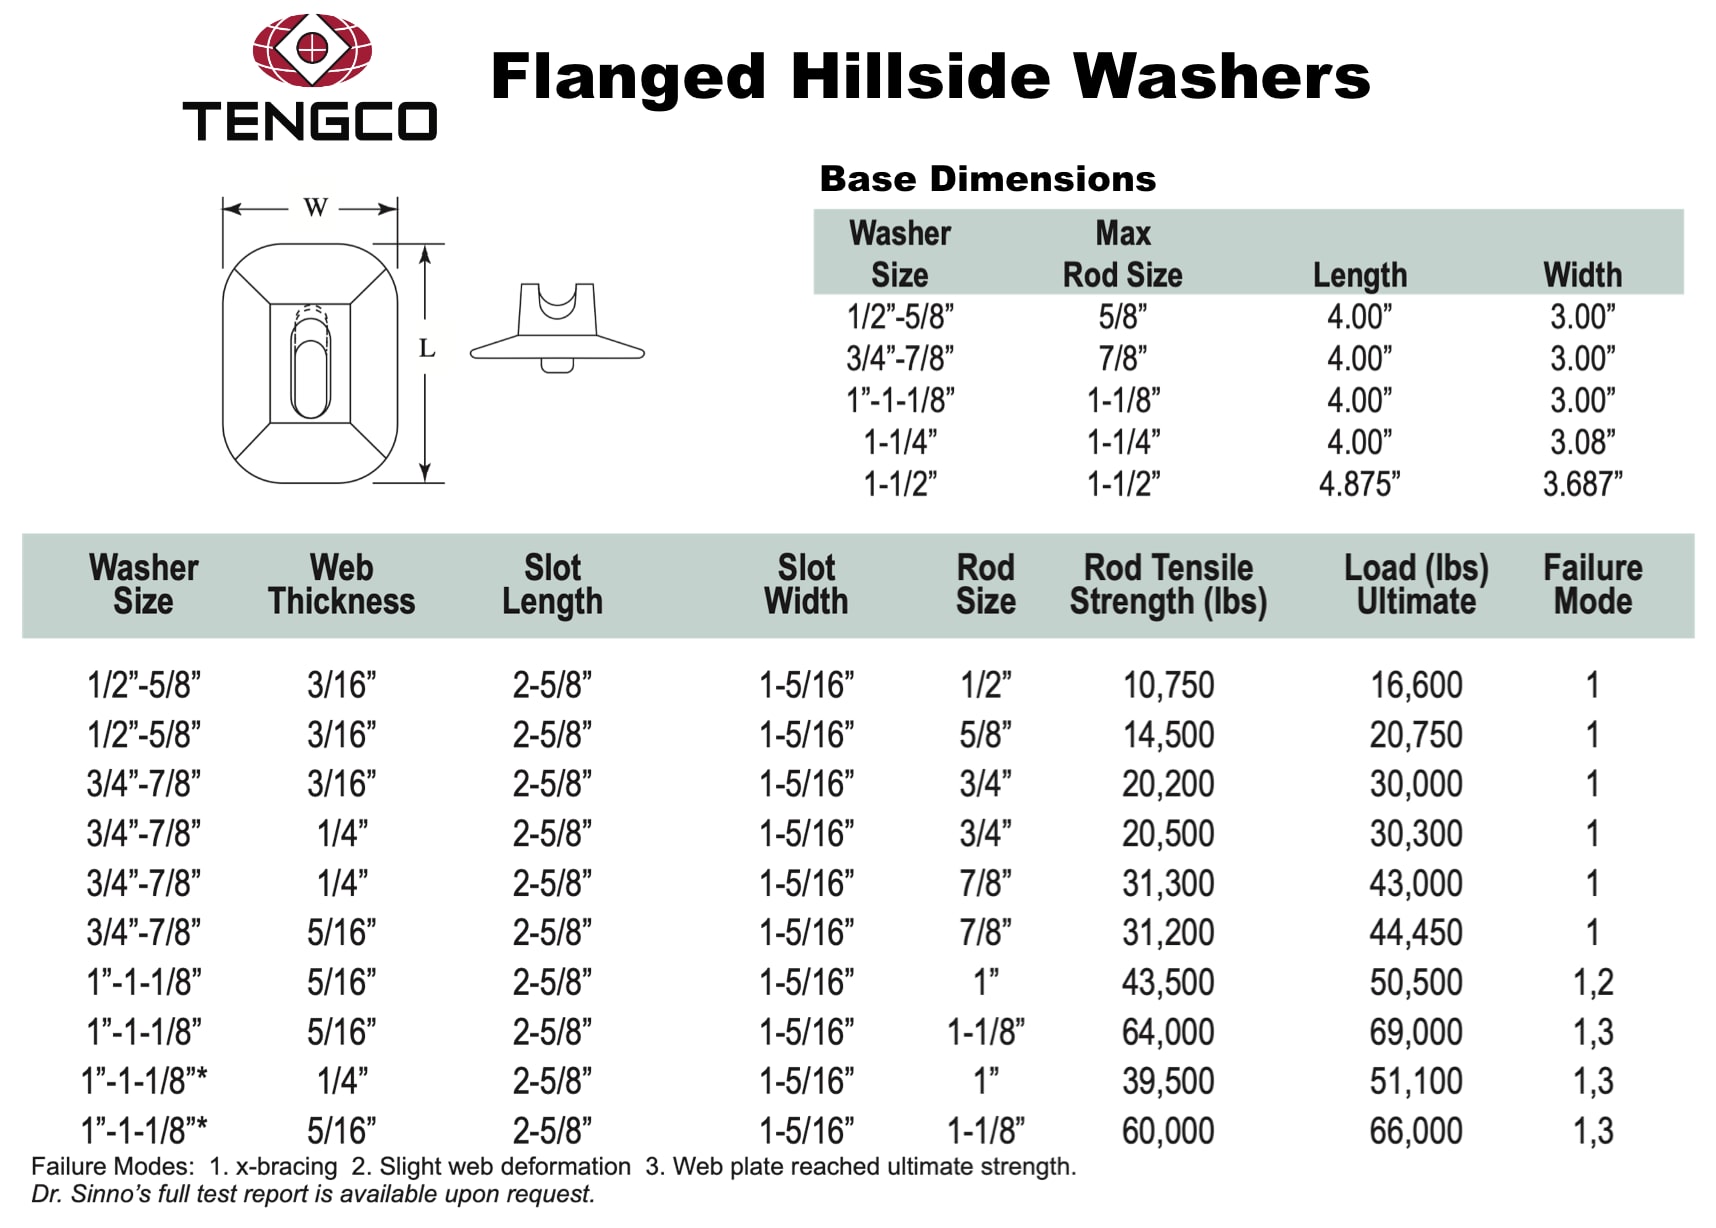 flanged hillside washers dimensions chart